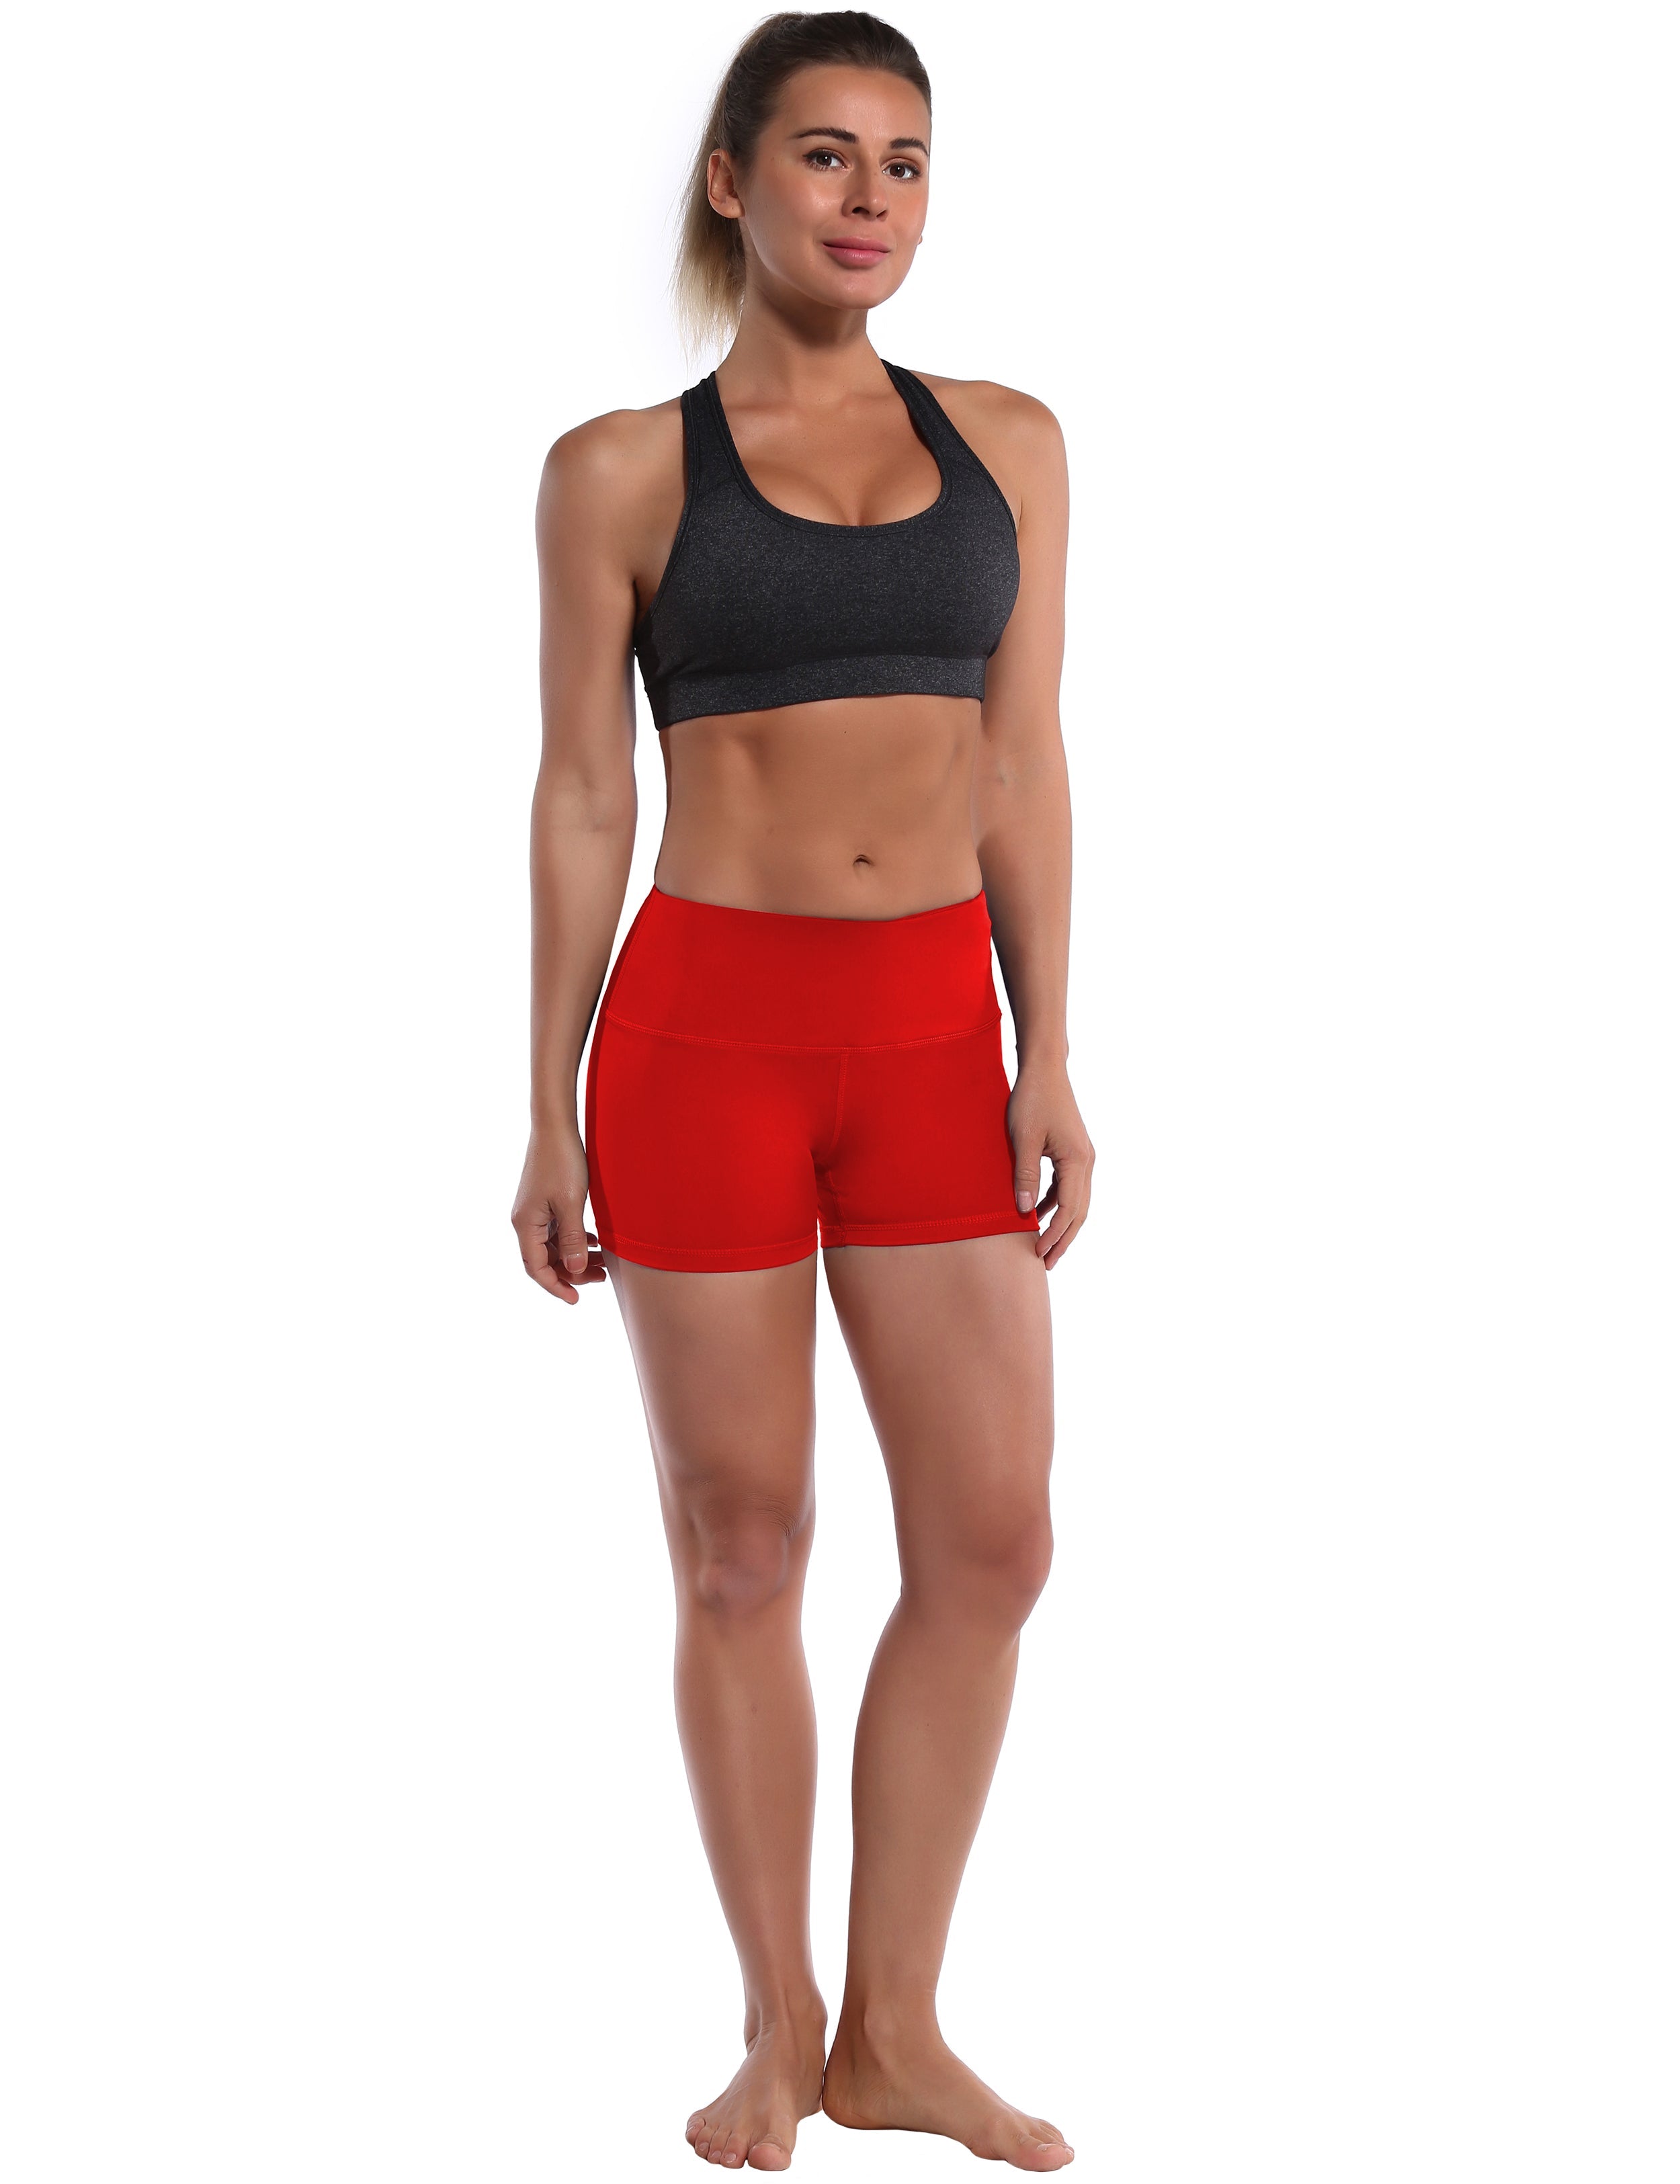 2.5" Golf Shorts scarlet Softest-ever fabric High elasticity High density 4-way stretch Fabric doesn't attract lint easily No see-through Moisture-wicking Machine wash 75% Nylon, 25% Spandex